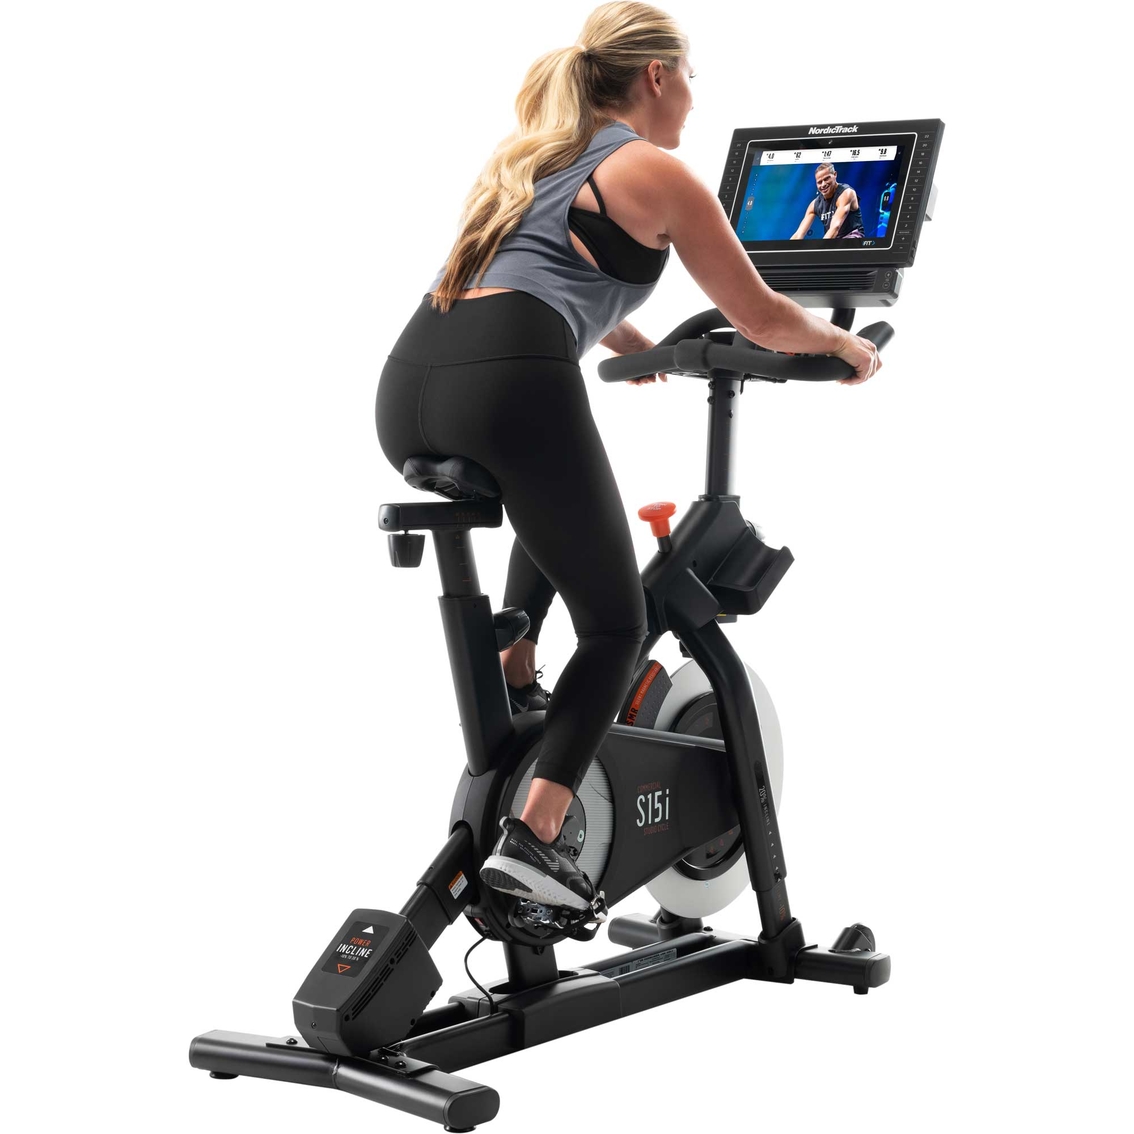 NordicTrack Commercial S15i Exercise Bike - Image 3 of 3